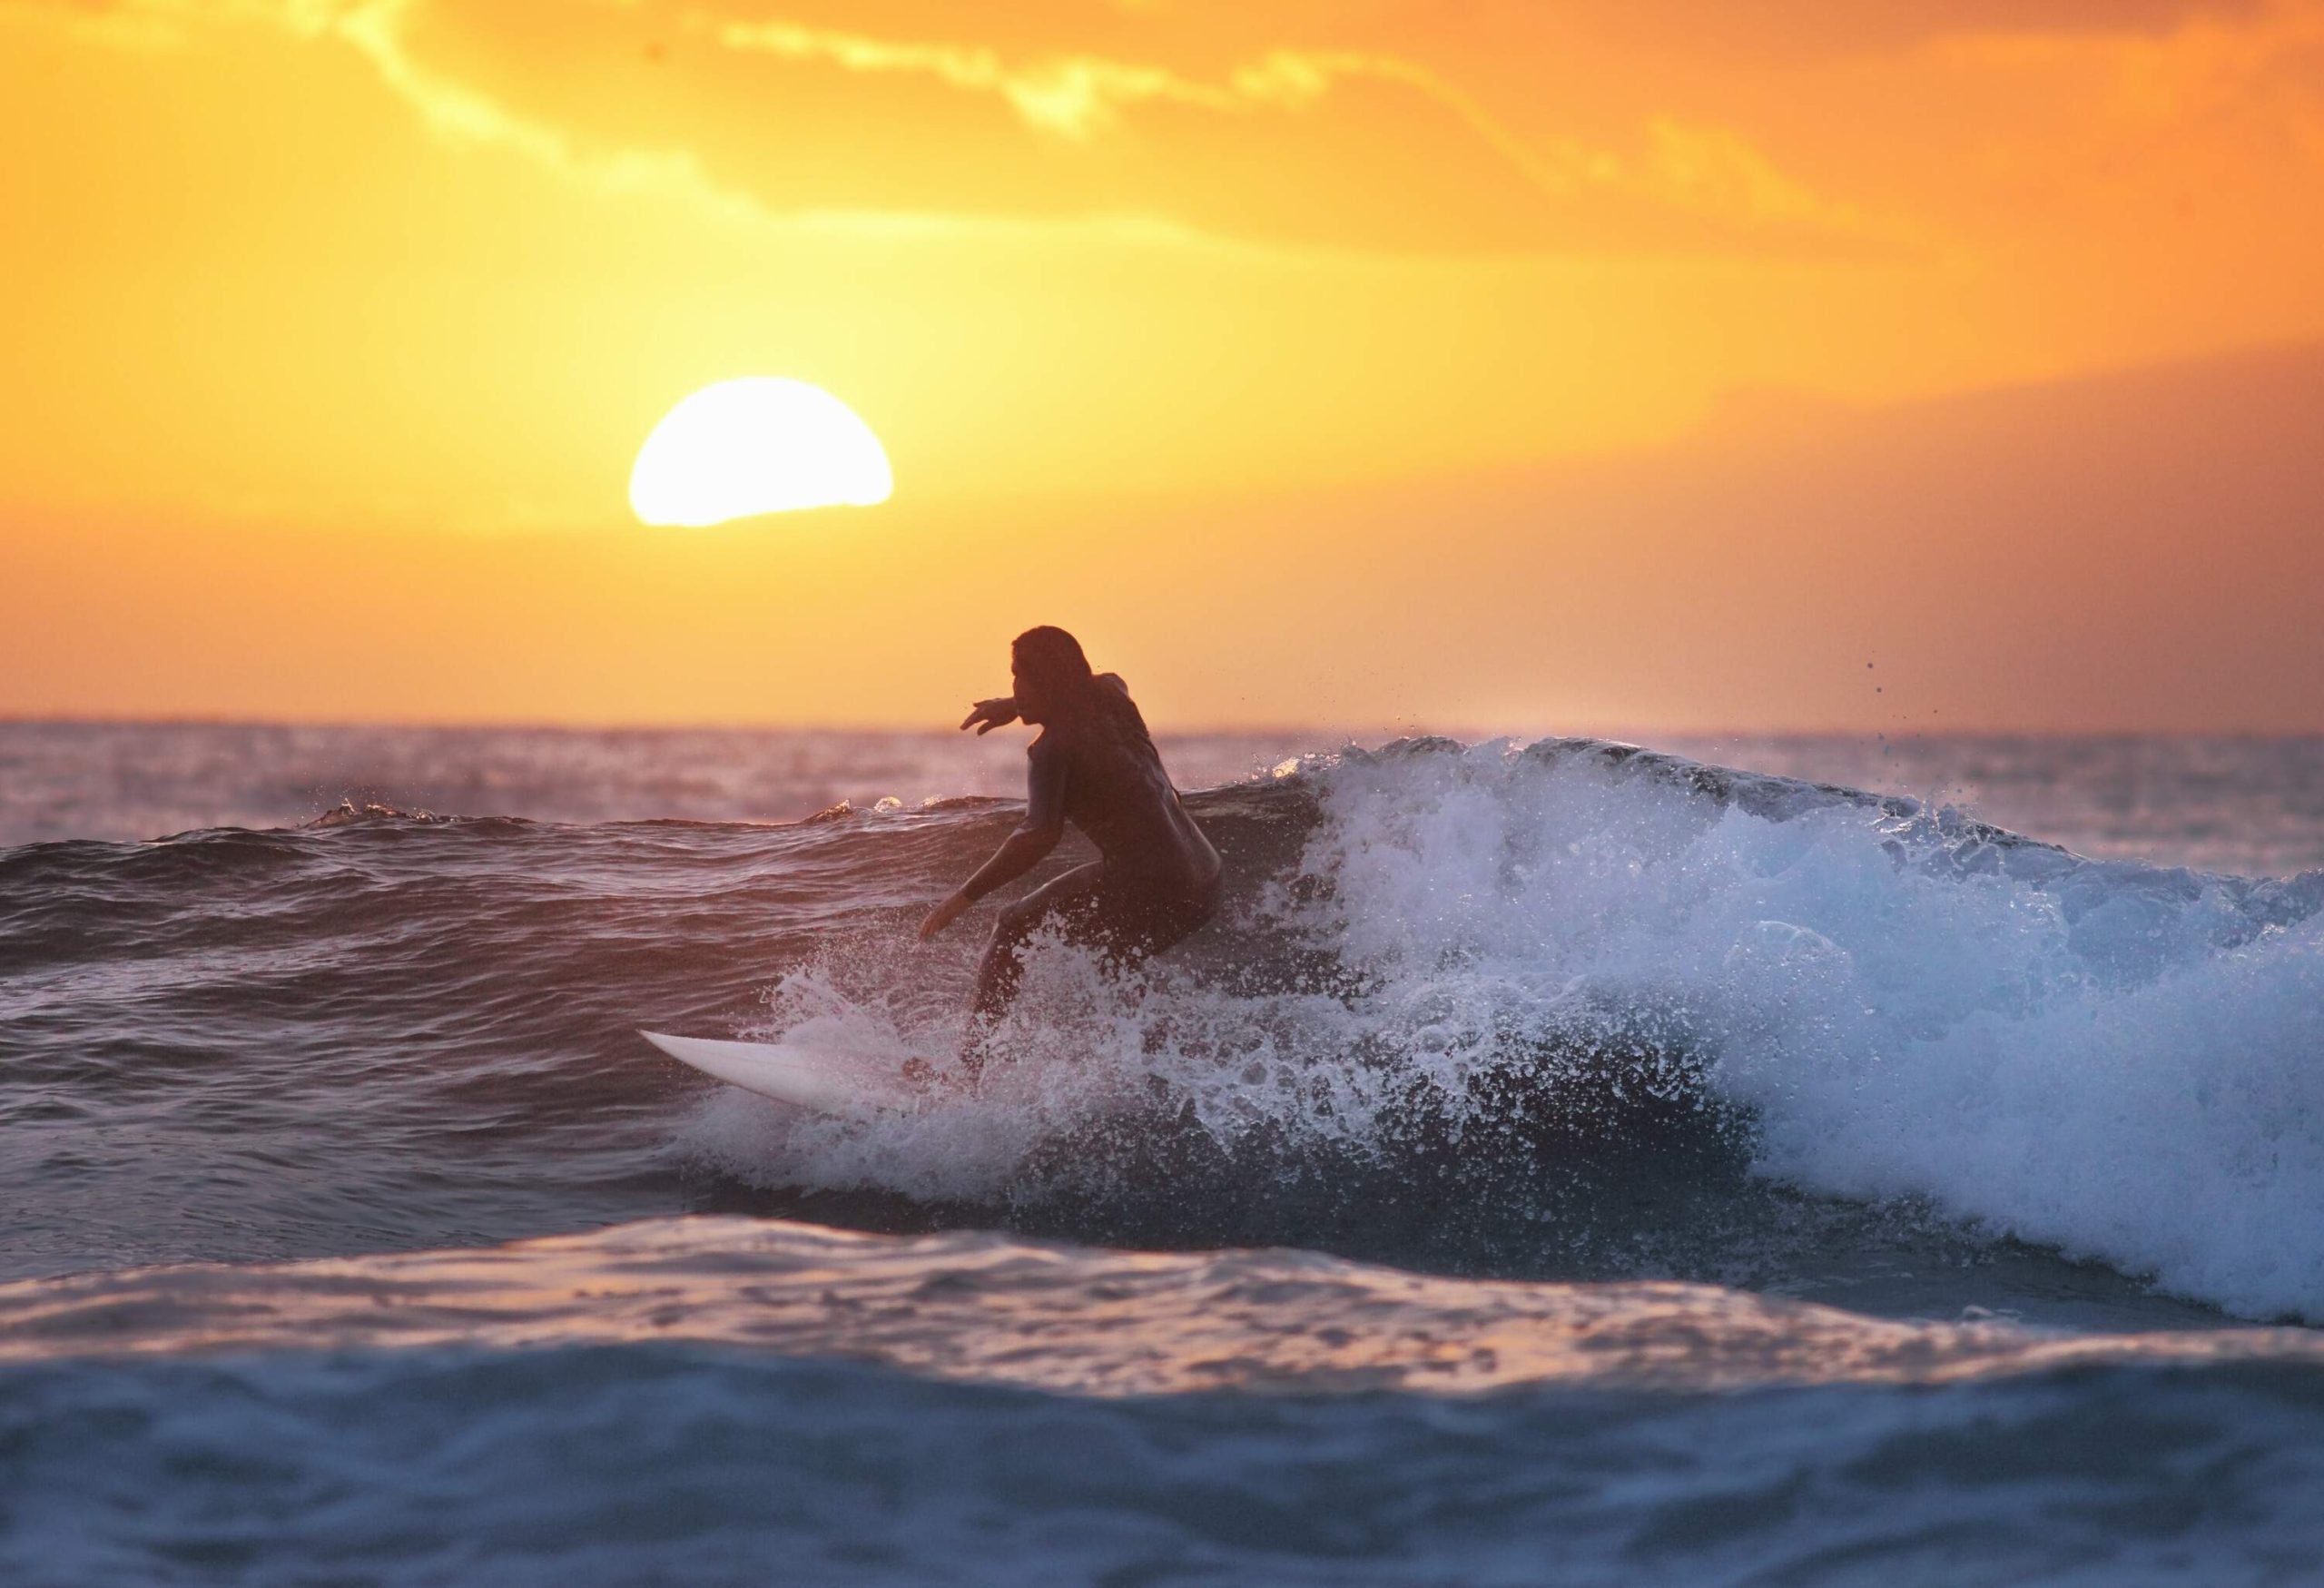 A surfer riding the waves in the midst of the sea.